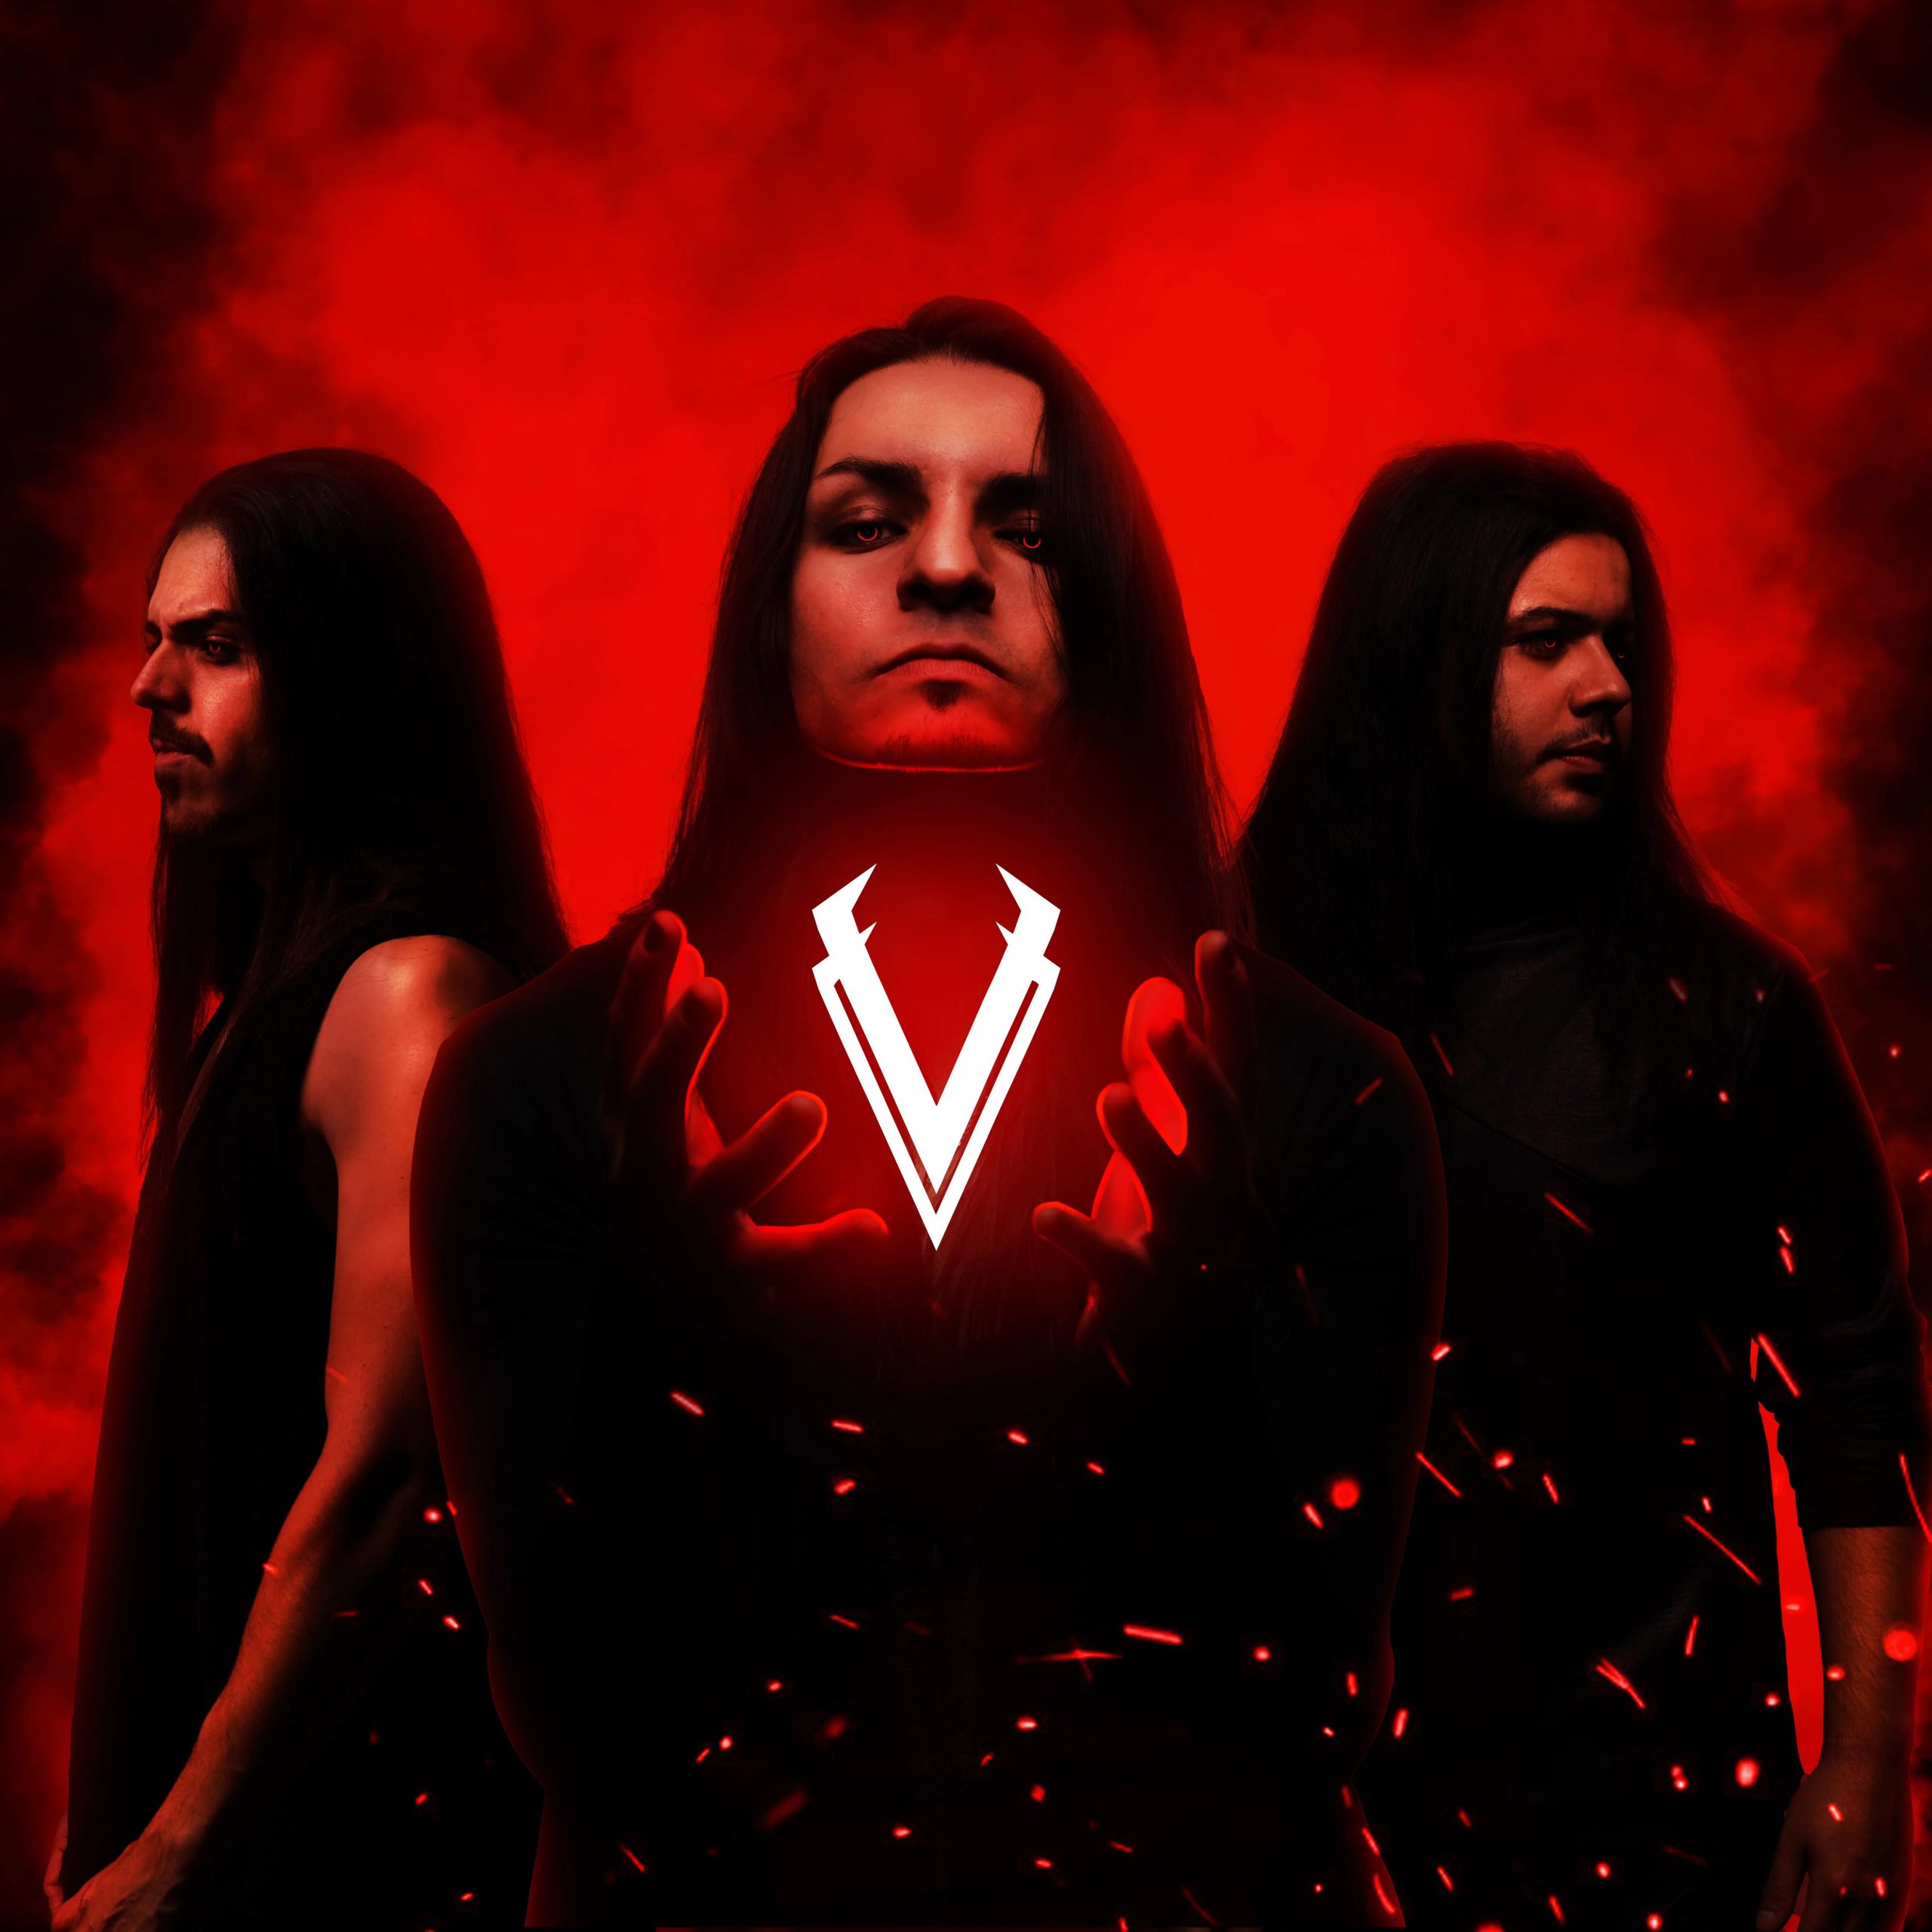 ‘Red Devil Vortex’ bring out new music video ‘Psycho’